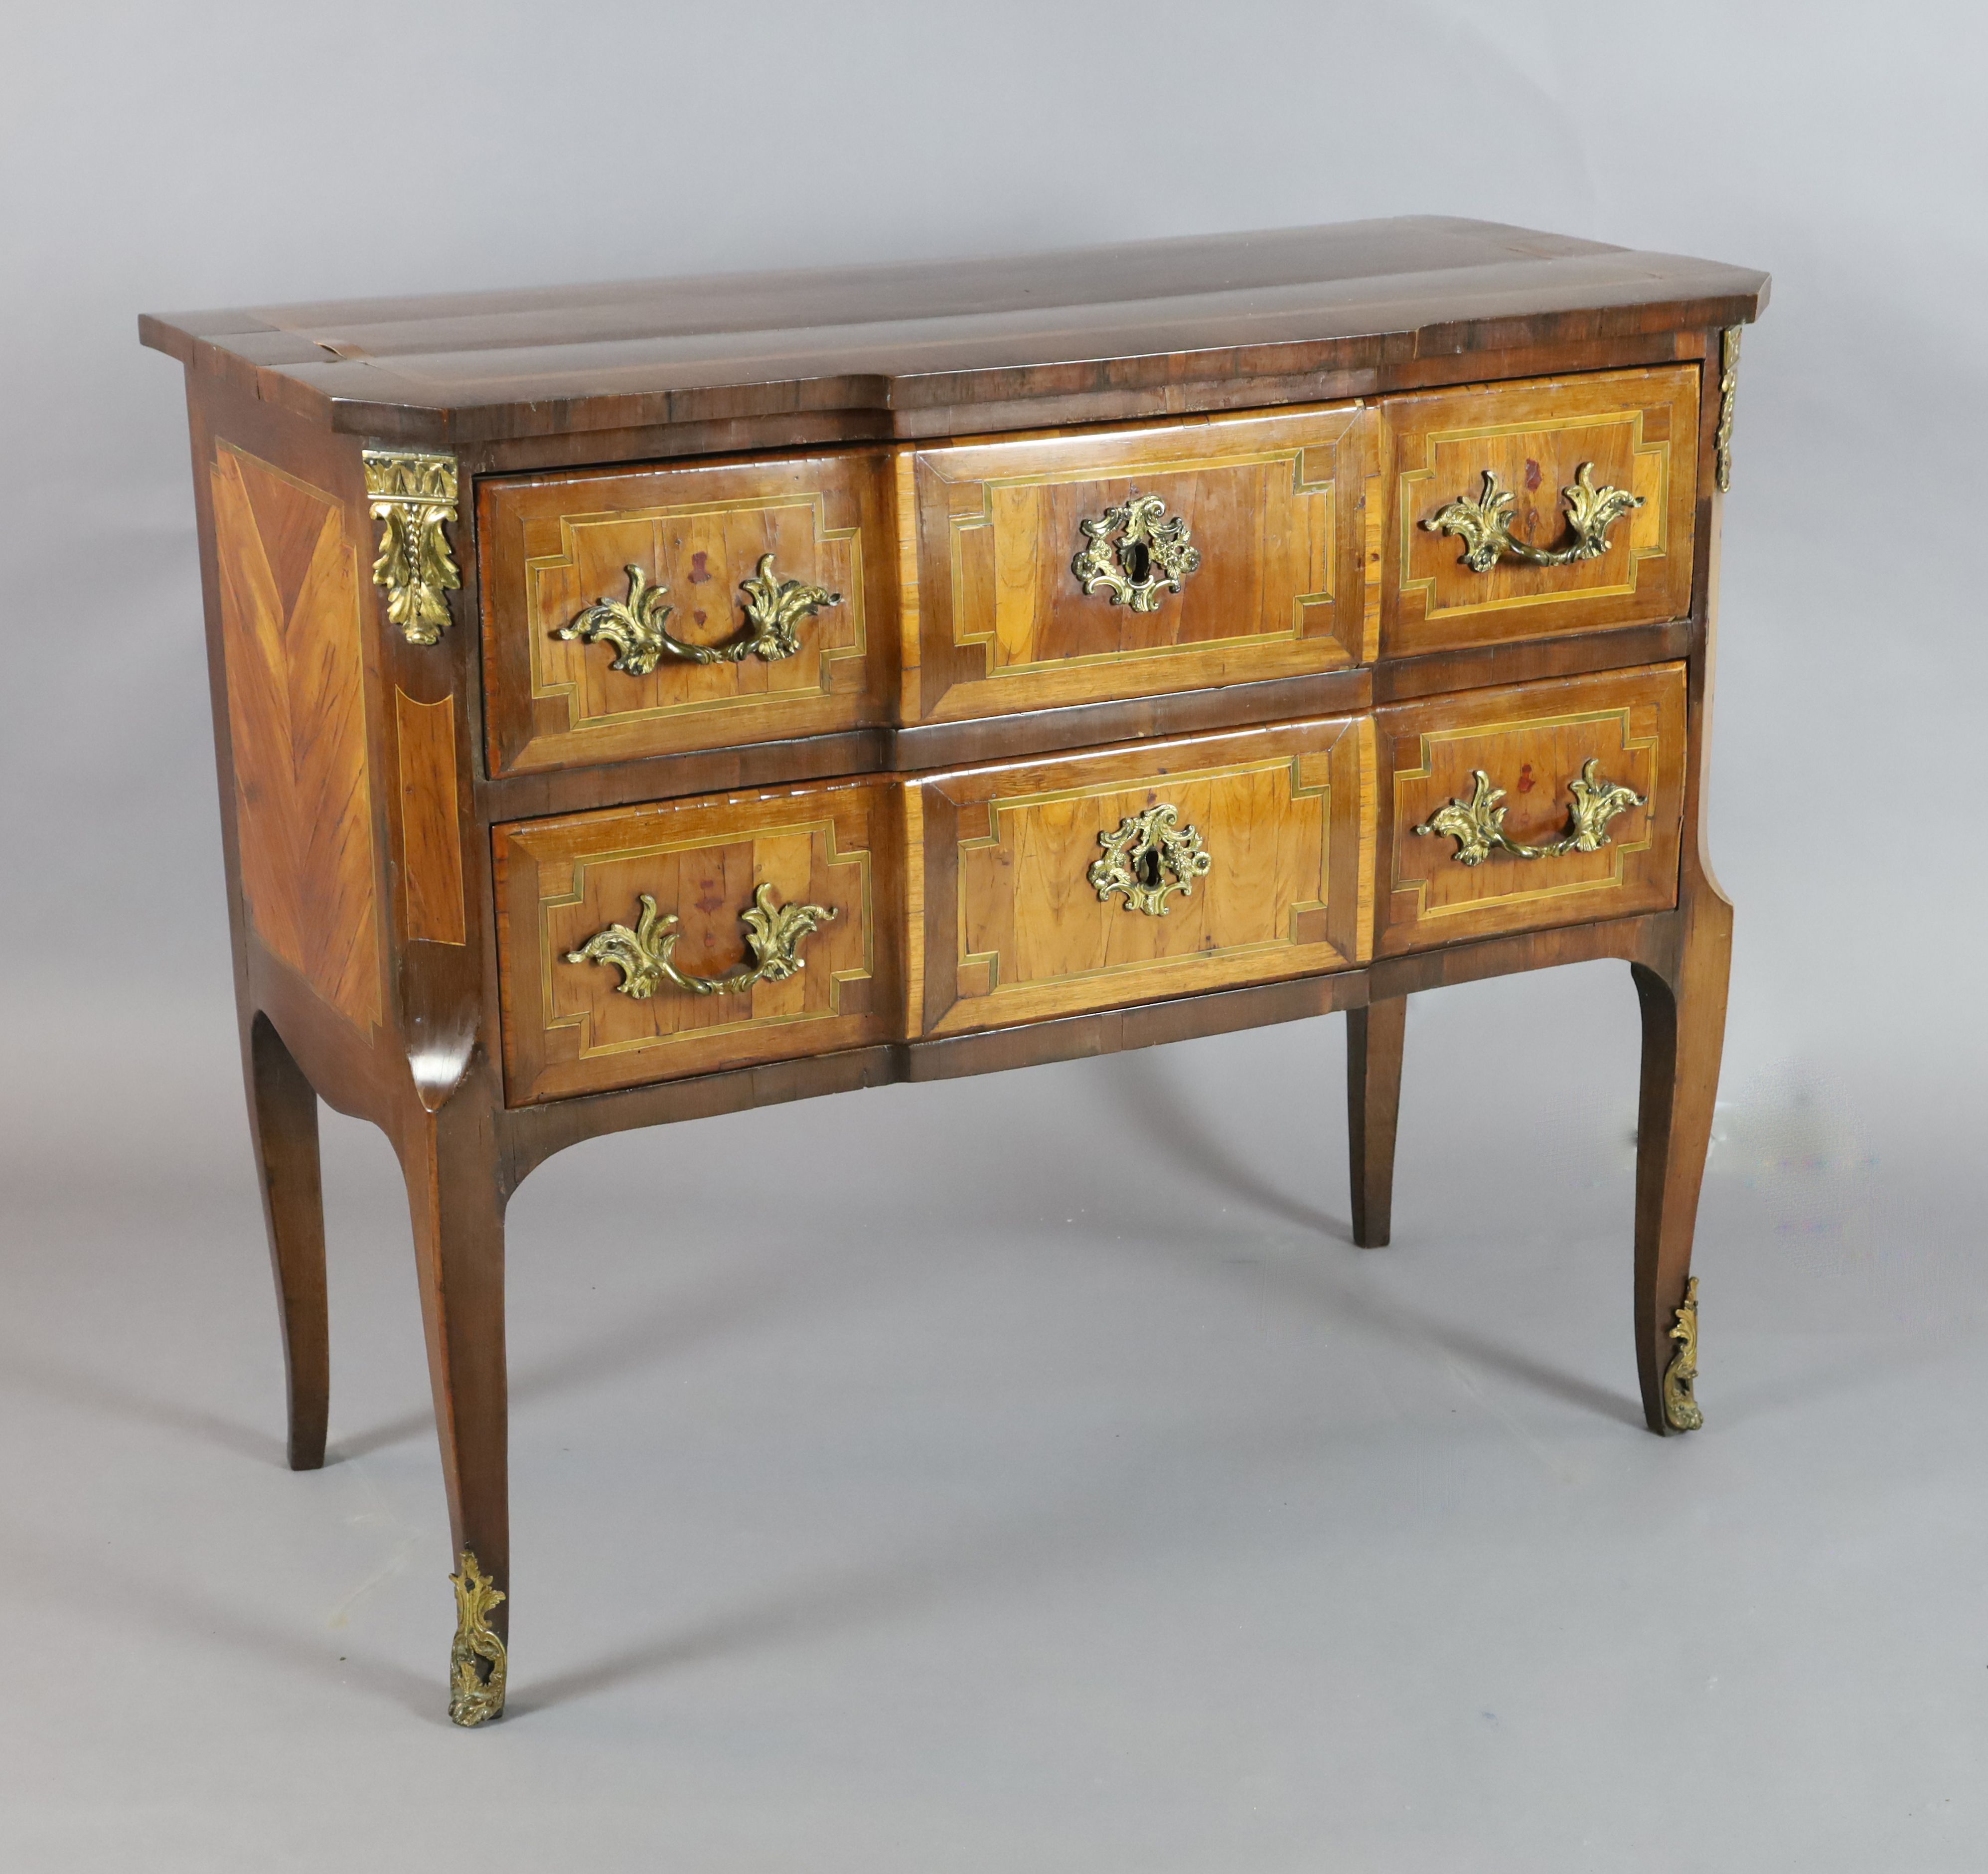 An 18th century Italian ormolu mounted walnut breakfront commode, cross-banded, line-inlaid and